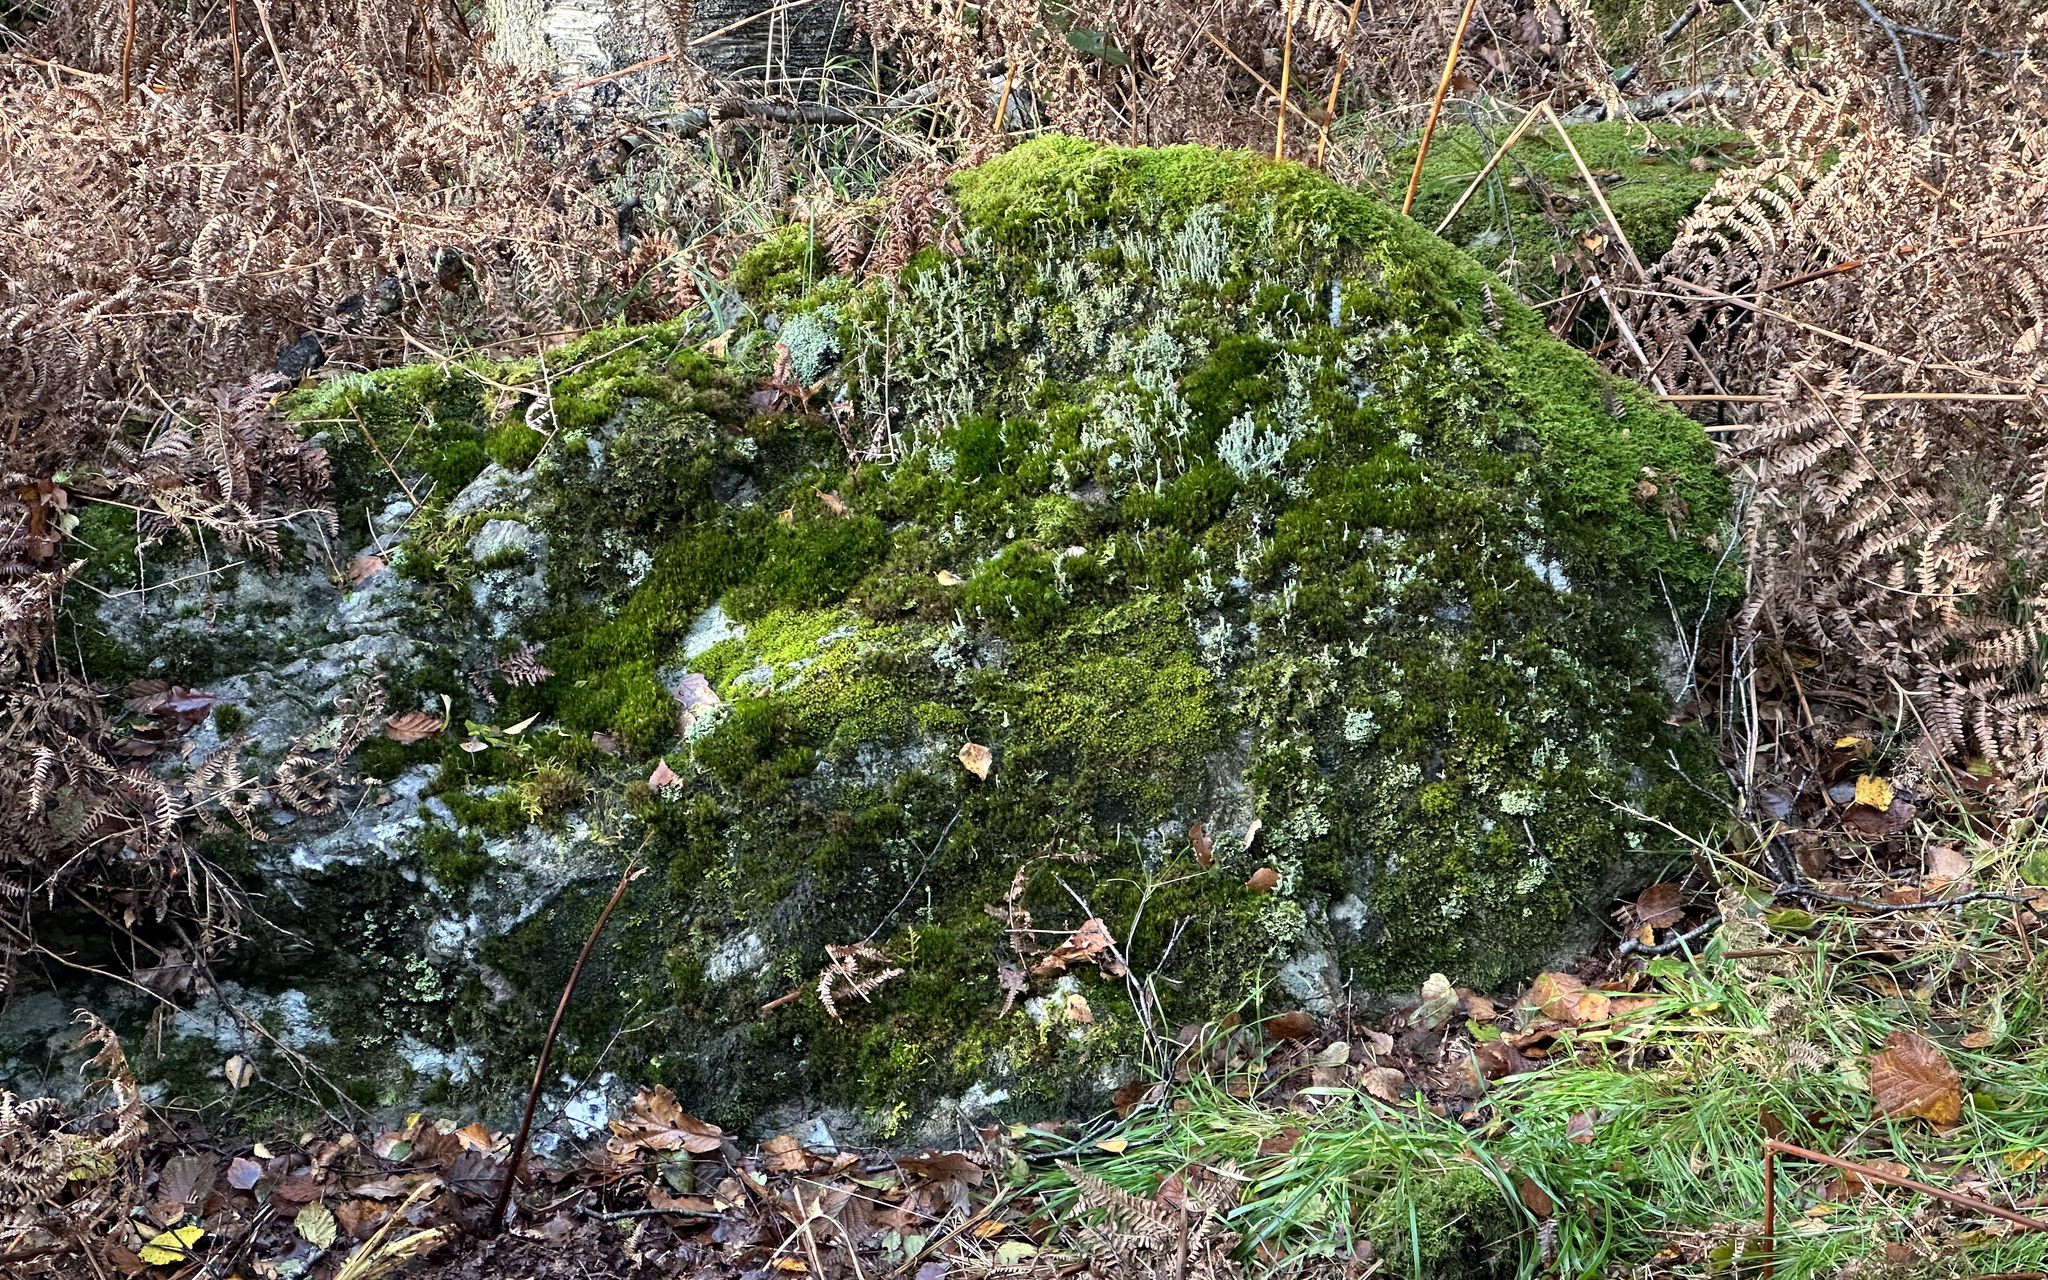 Moss and Cladonia covered boulder